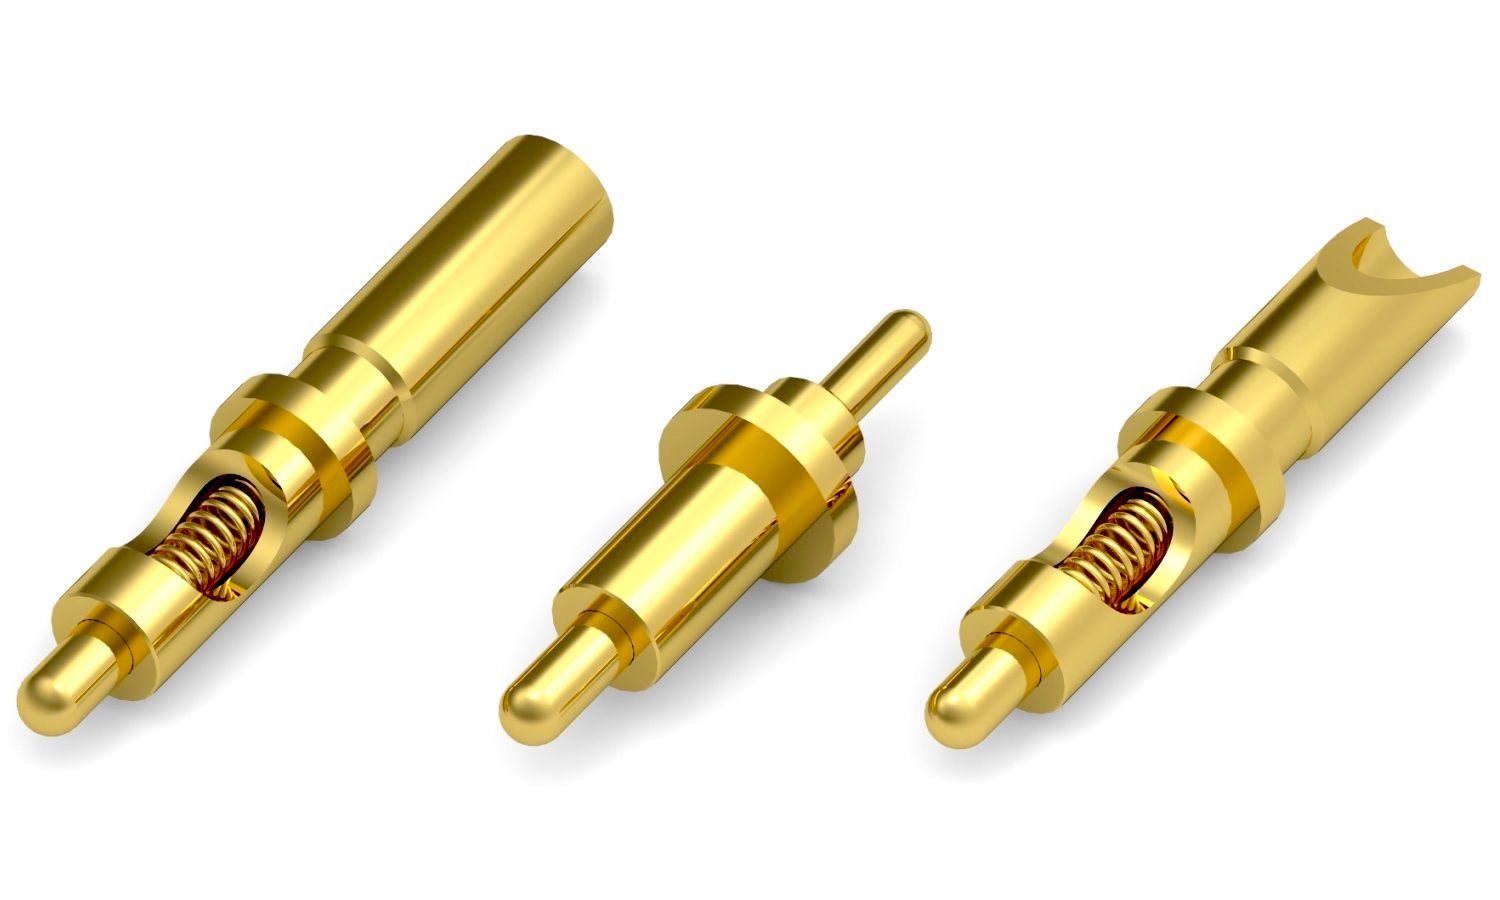 New Connector and Cable Products: April 2019 - Mill-Max 08XX Series Ruggedized, High-Current Spring Pins